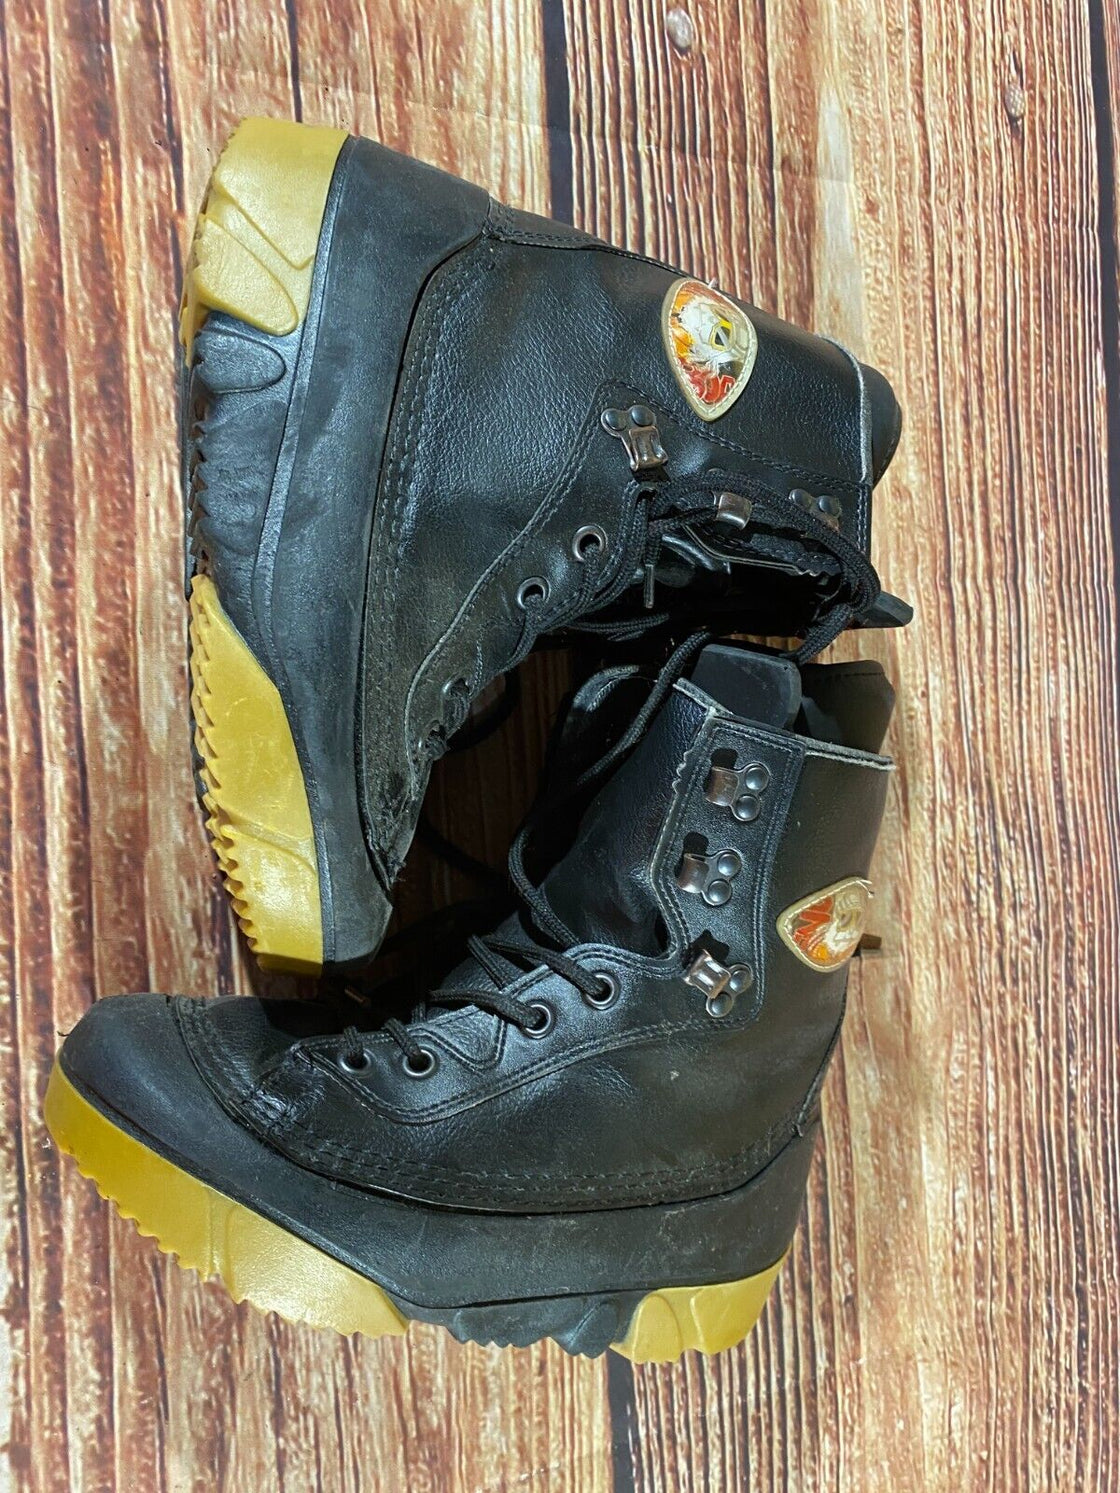 FAST Vintage Snowboard Boots Youth Kids Size EU35, US5, Mondo 222 mm